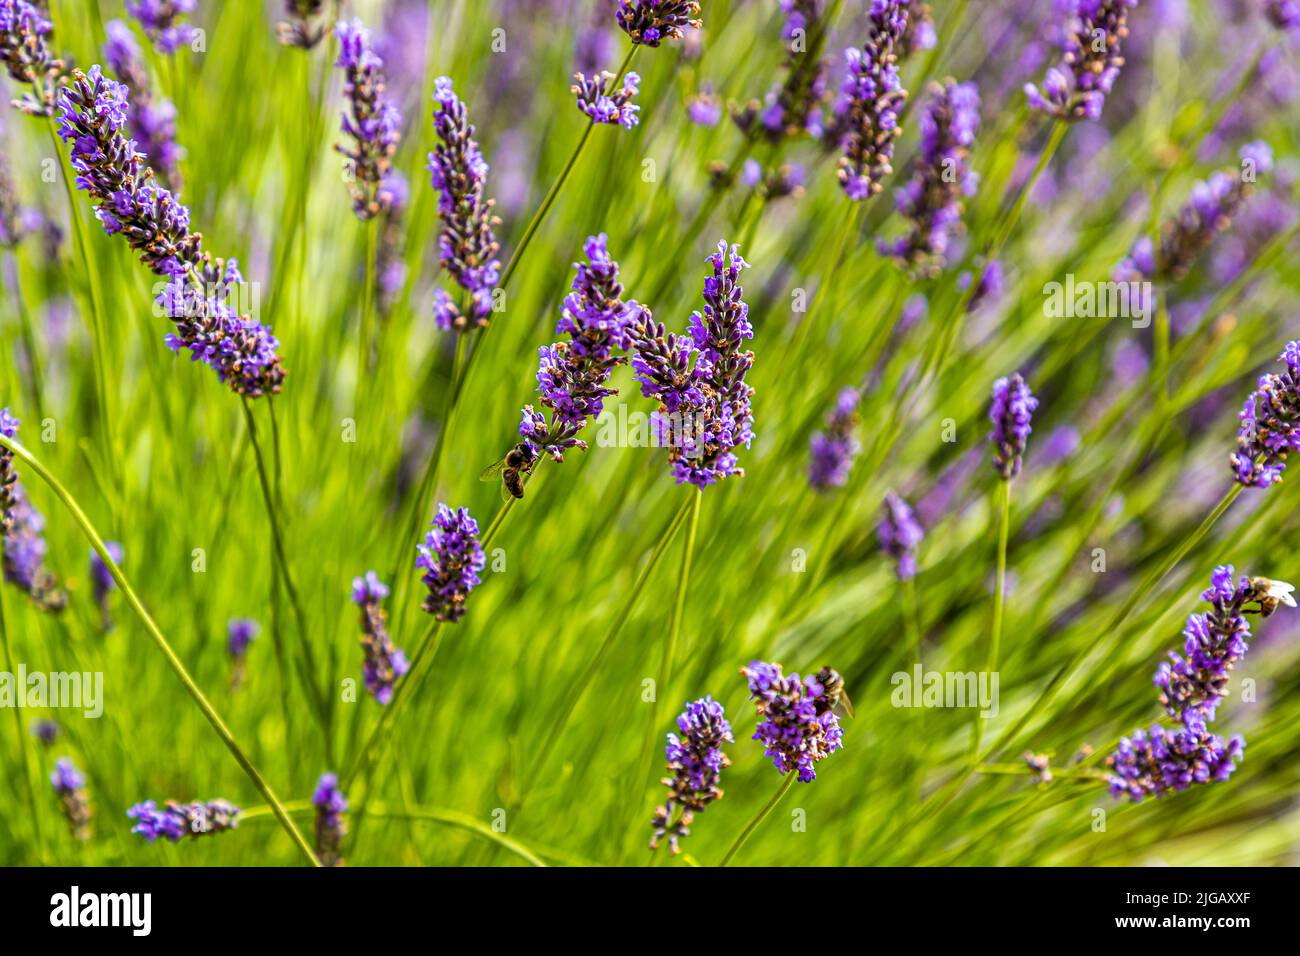 Flower panicles of lavender. However, lavandin is grown in this field. True lavender and lavandin are related, but between the true lavender (Lavandula angustifolia) and lavandin (Lavandula Super) there is a difference, among other things, in the nuances of fragrance, medicinal effect and yield Stock Photo